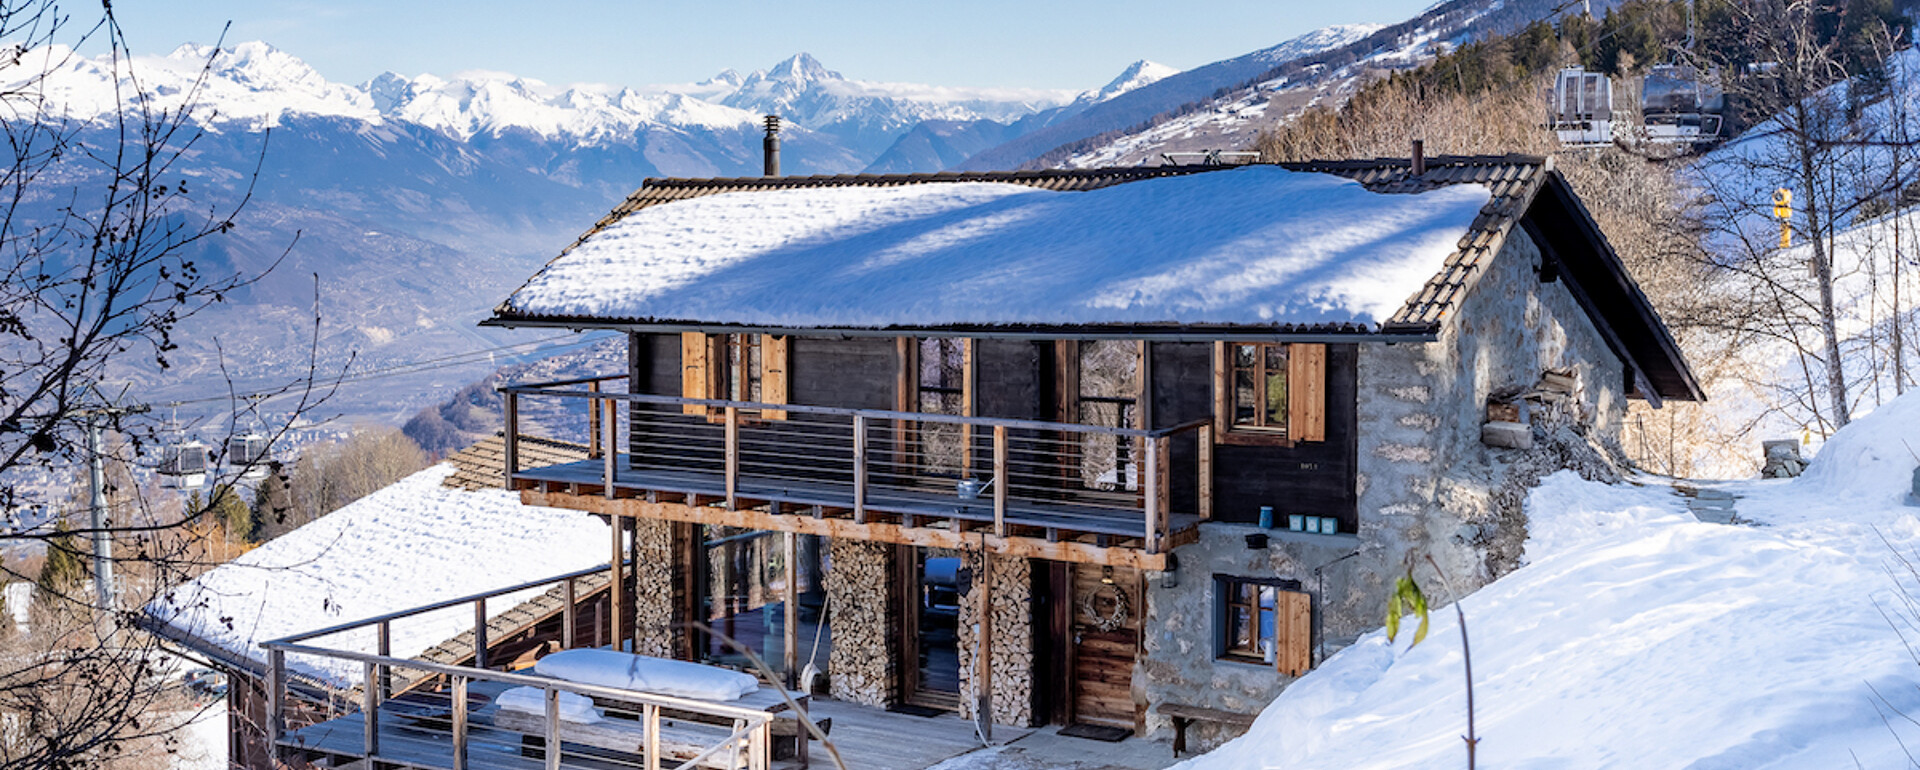 Chalet - On the Piste, Zwitserland